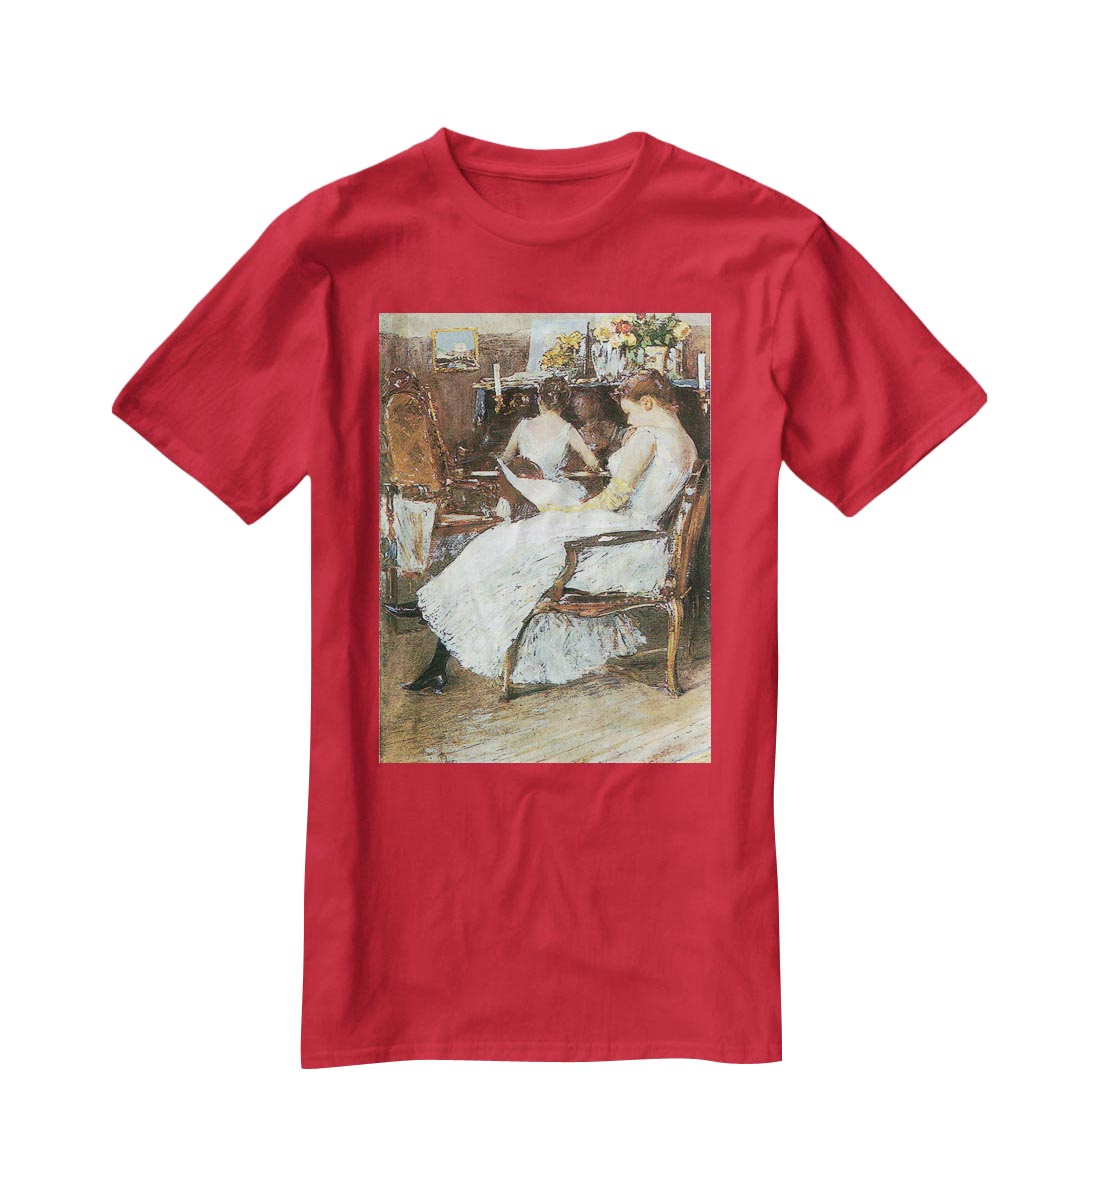 Mrs. Hassam and her sister by Hassam T-Shirt - Canvas Art Rocks - 4